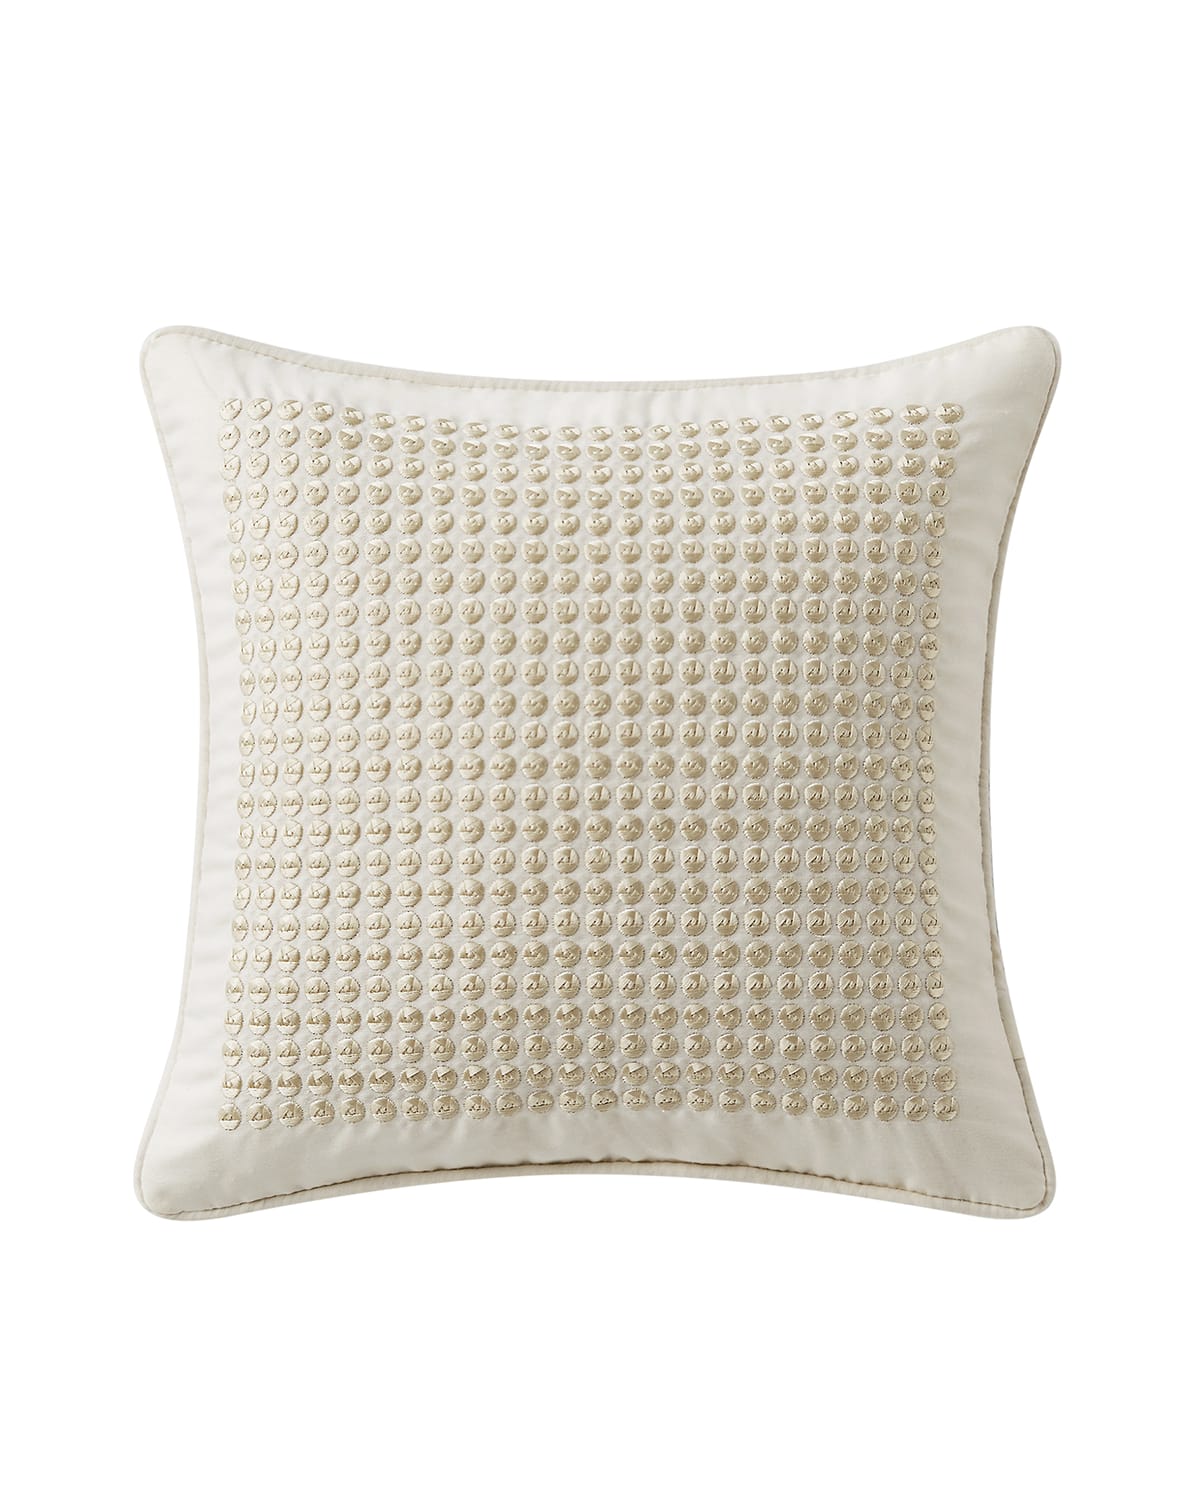 Image Waterford Daphne Embroidered Square Pillow